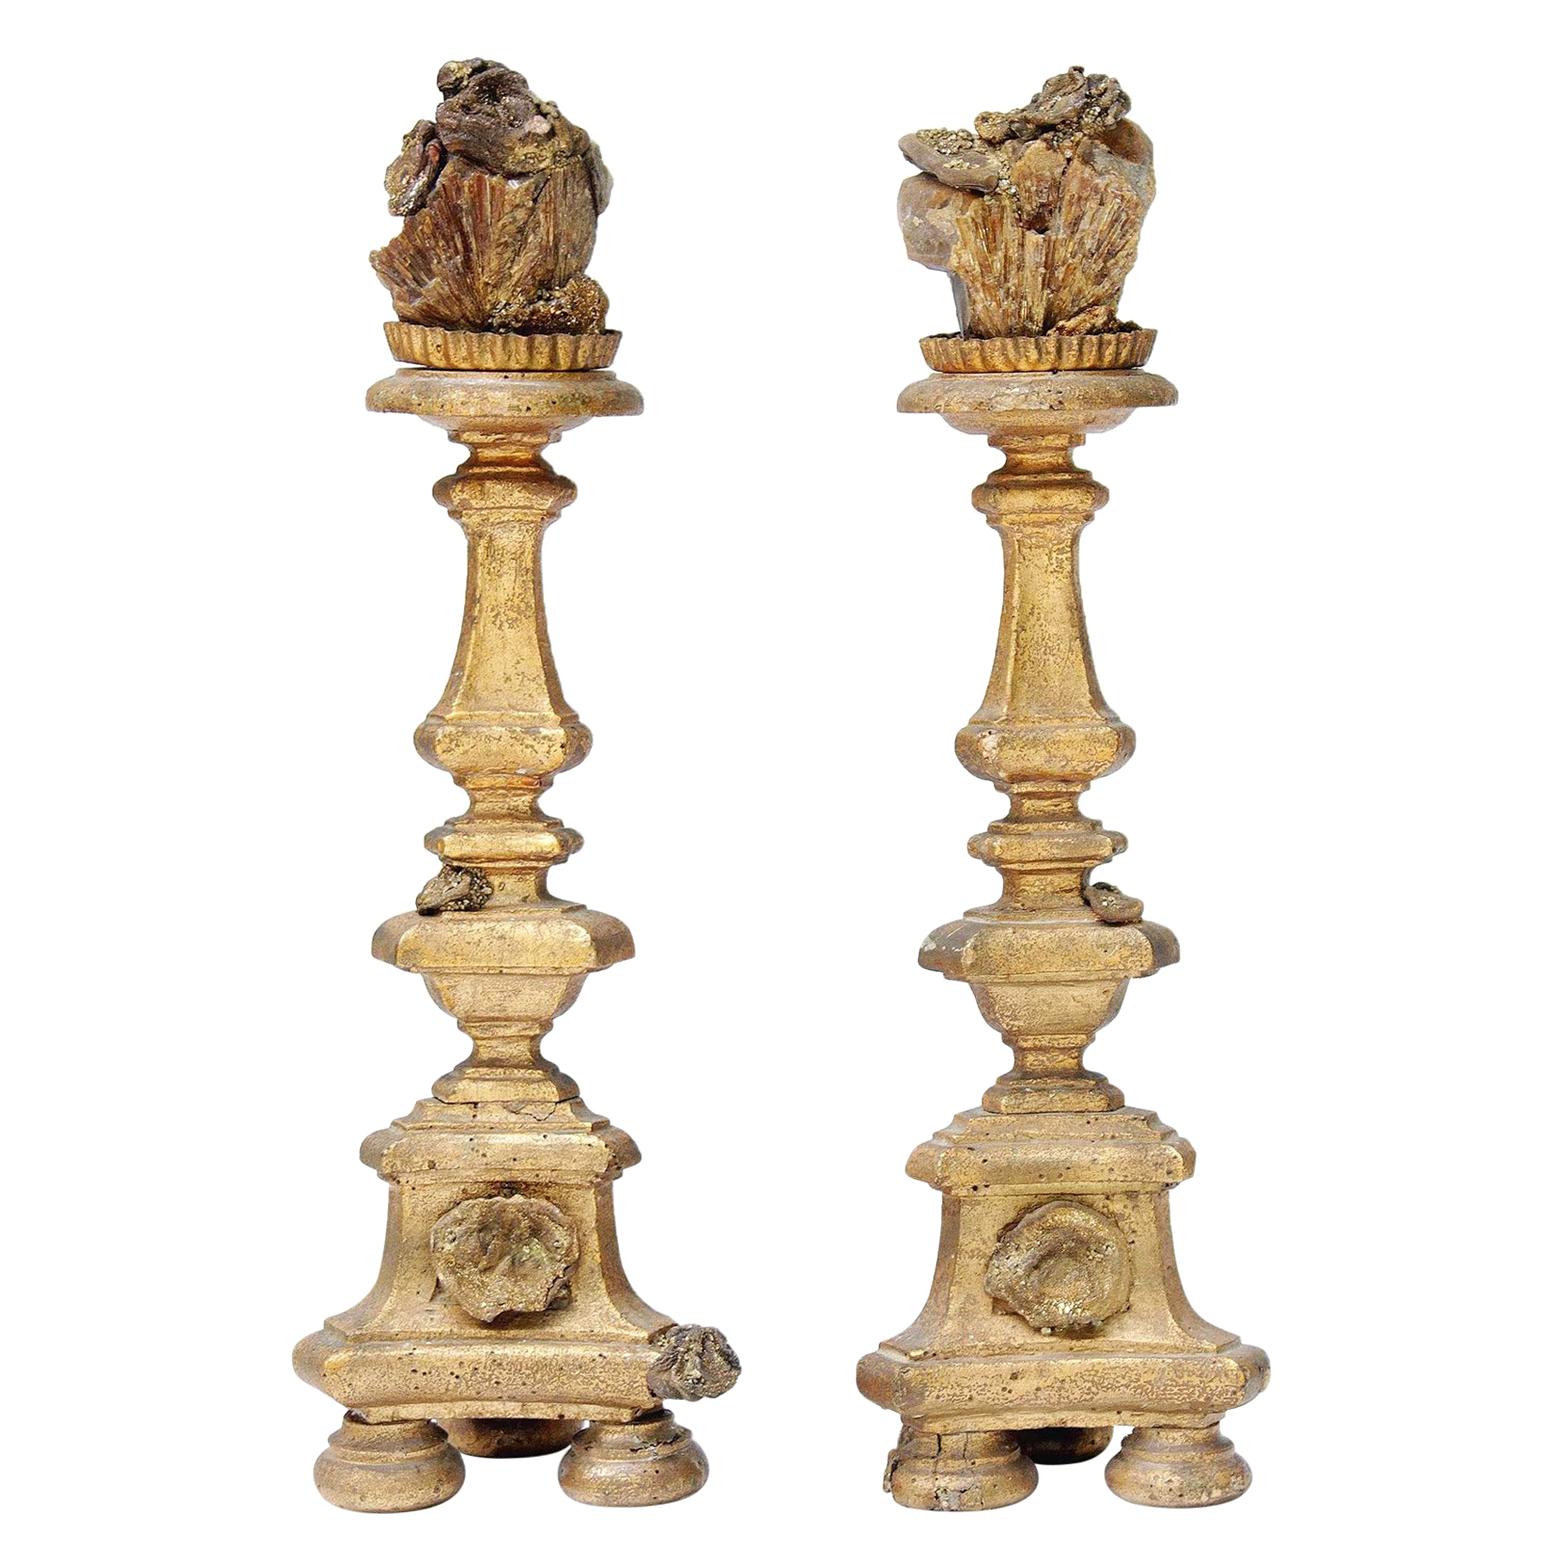 Pair of 18th Century Italian Candlesticks with Chalcedony and Barite Crystals